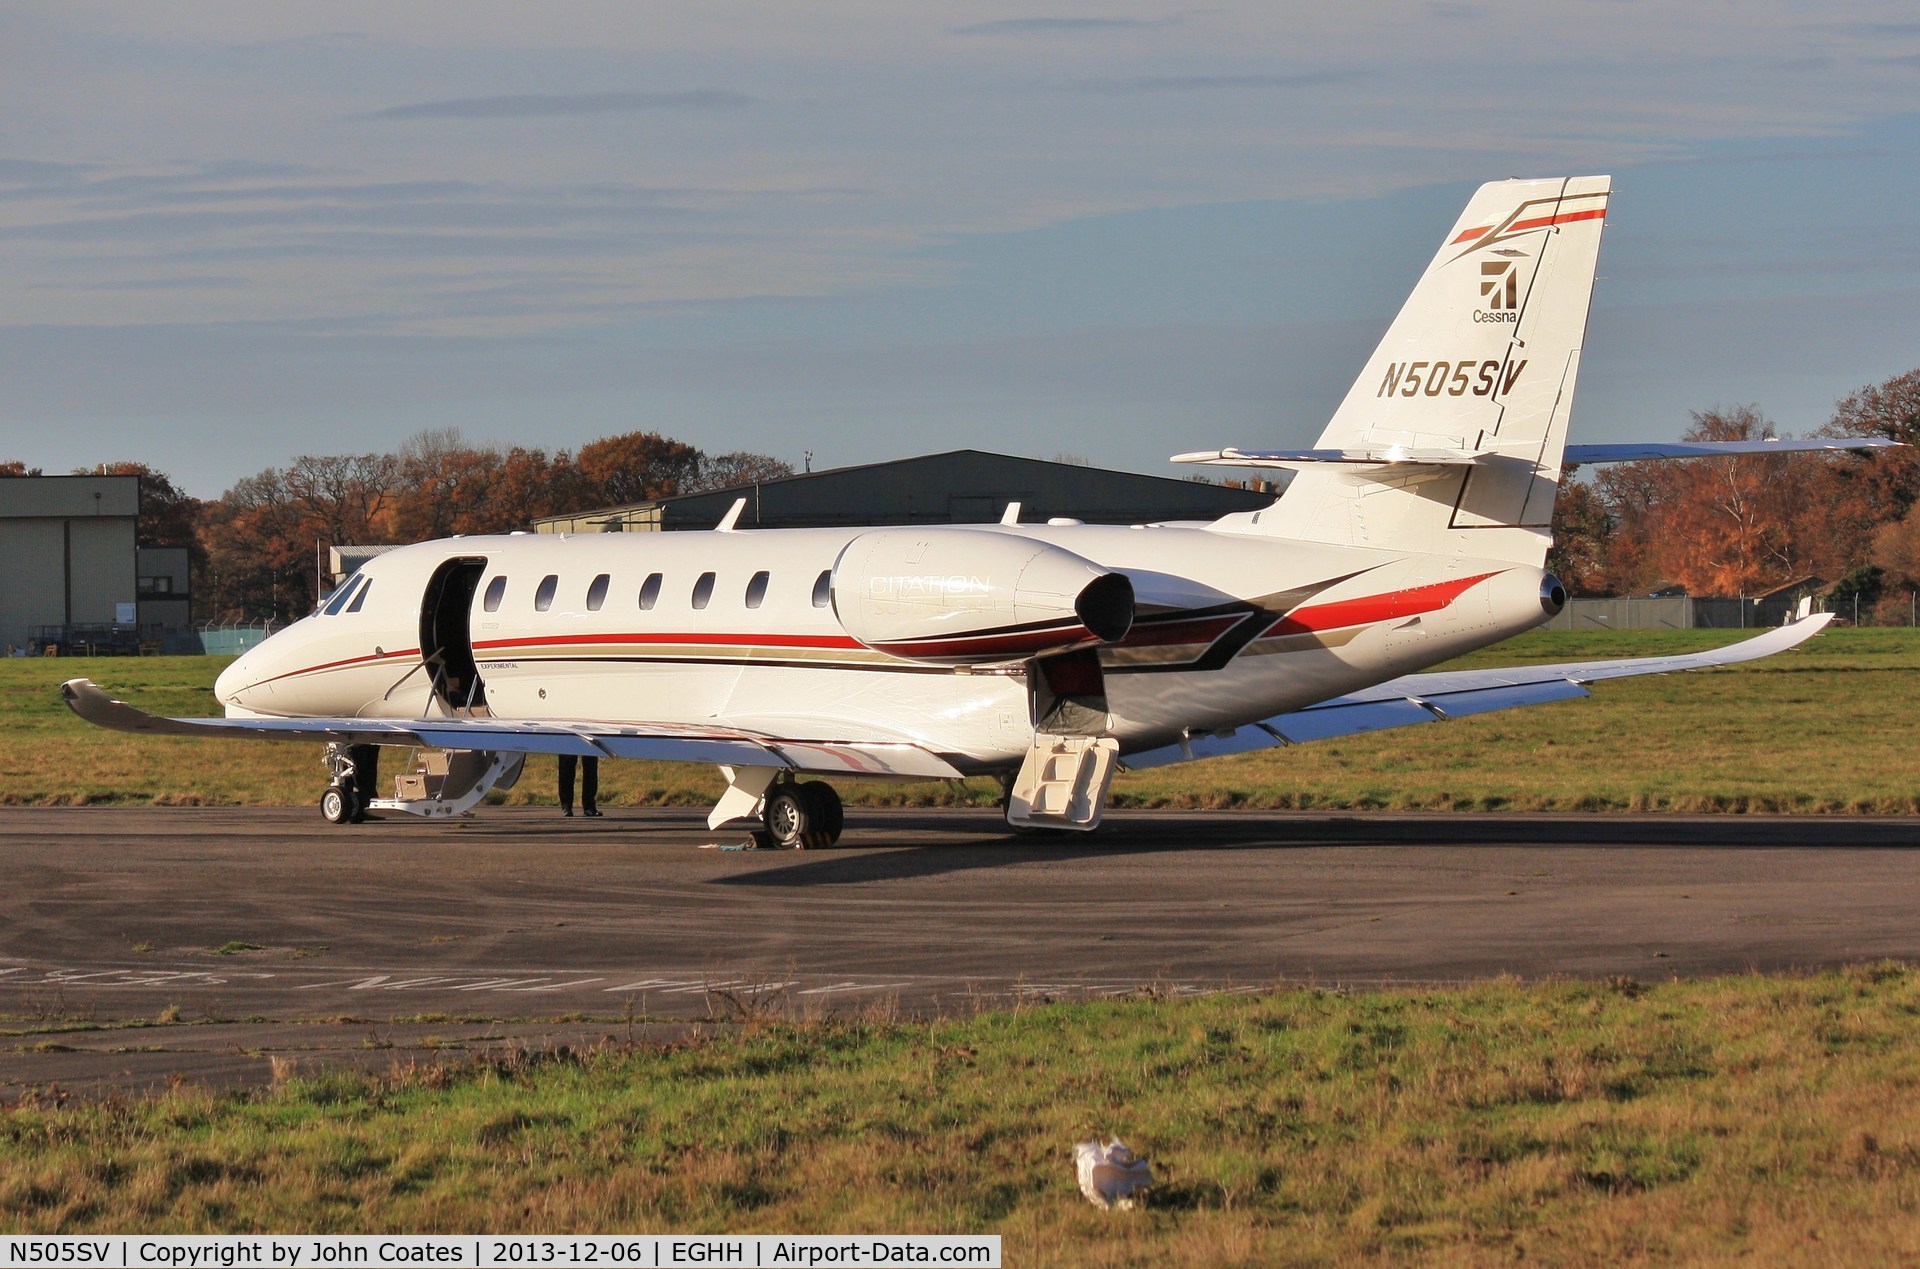 N505SV, 2013 Cessna Citation 680 Sovereign C/N 680-0505, Reported to be experimental version of Sovereign with extra wingspan and winglets looking impressive in the sunshine